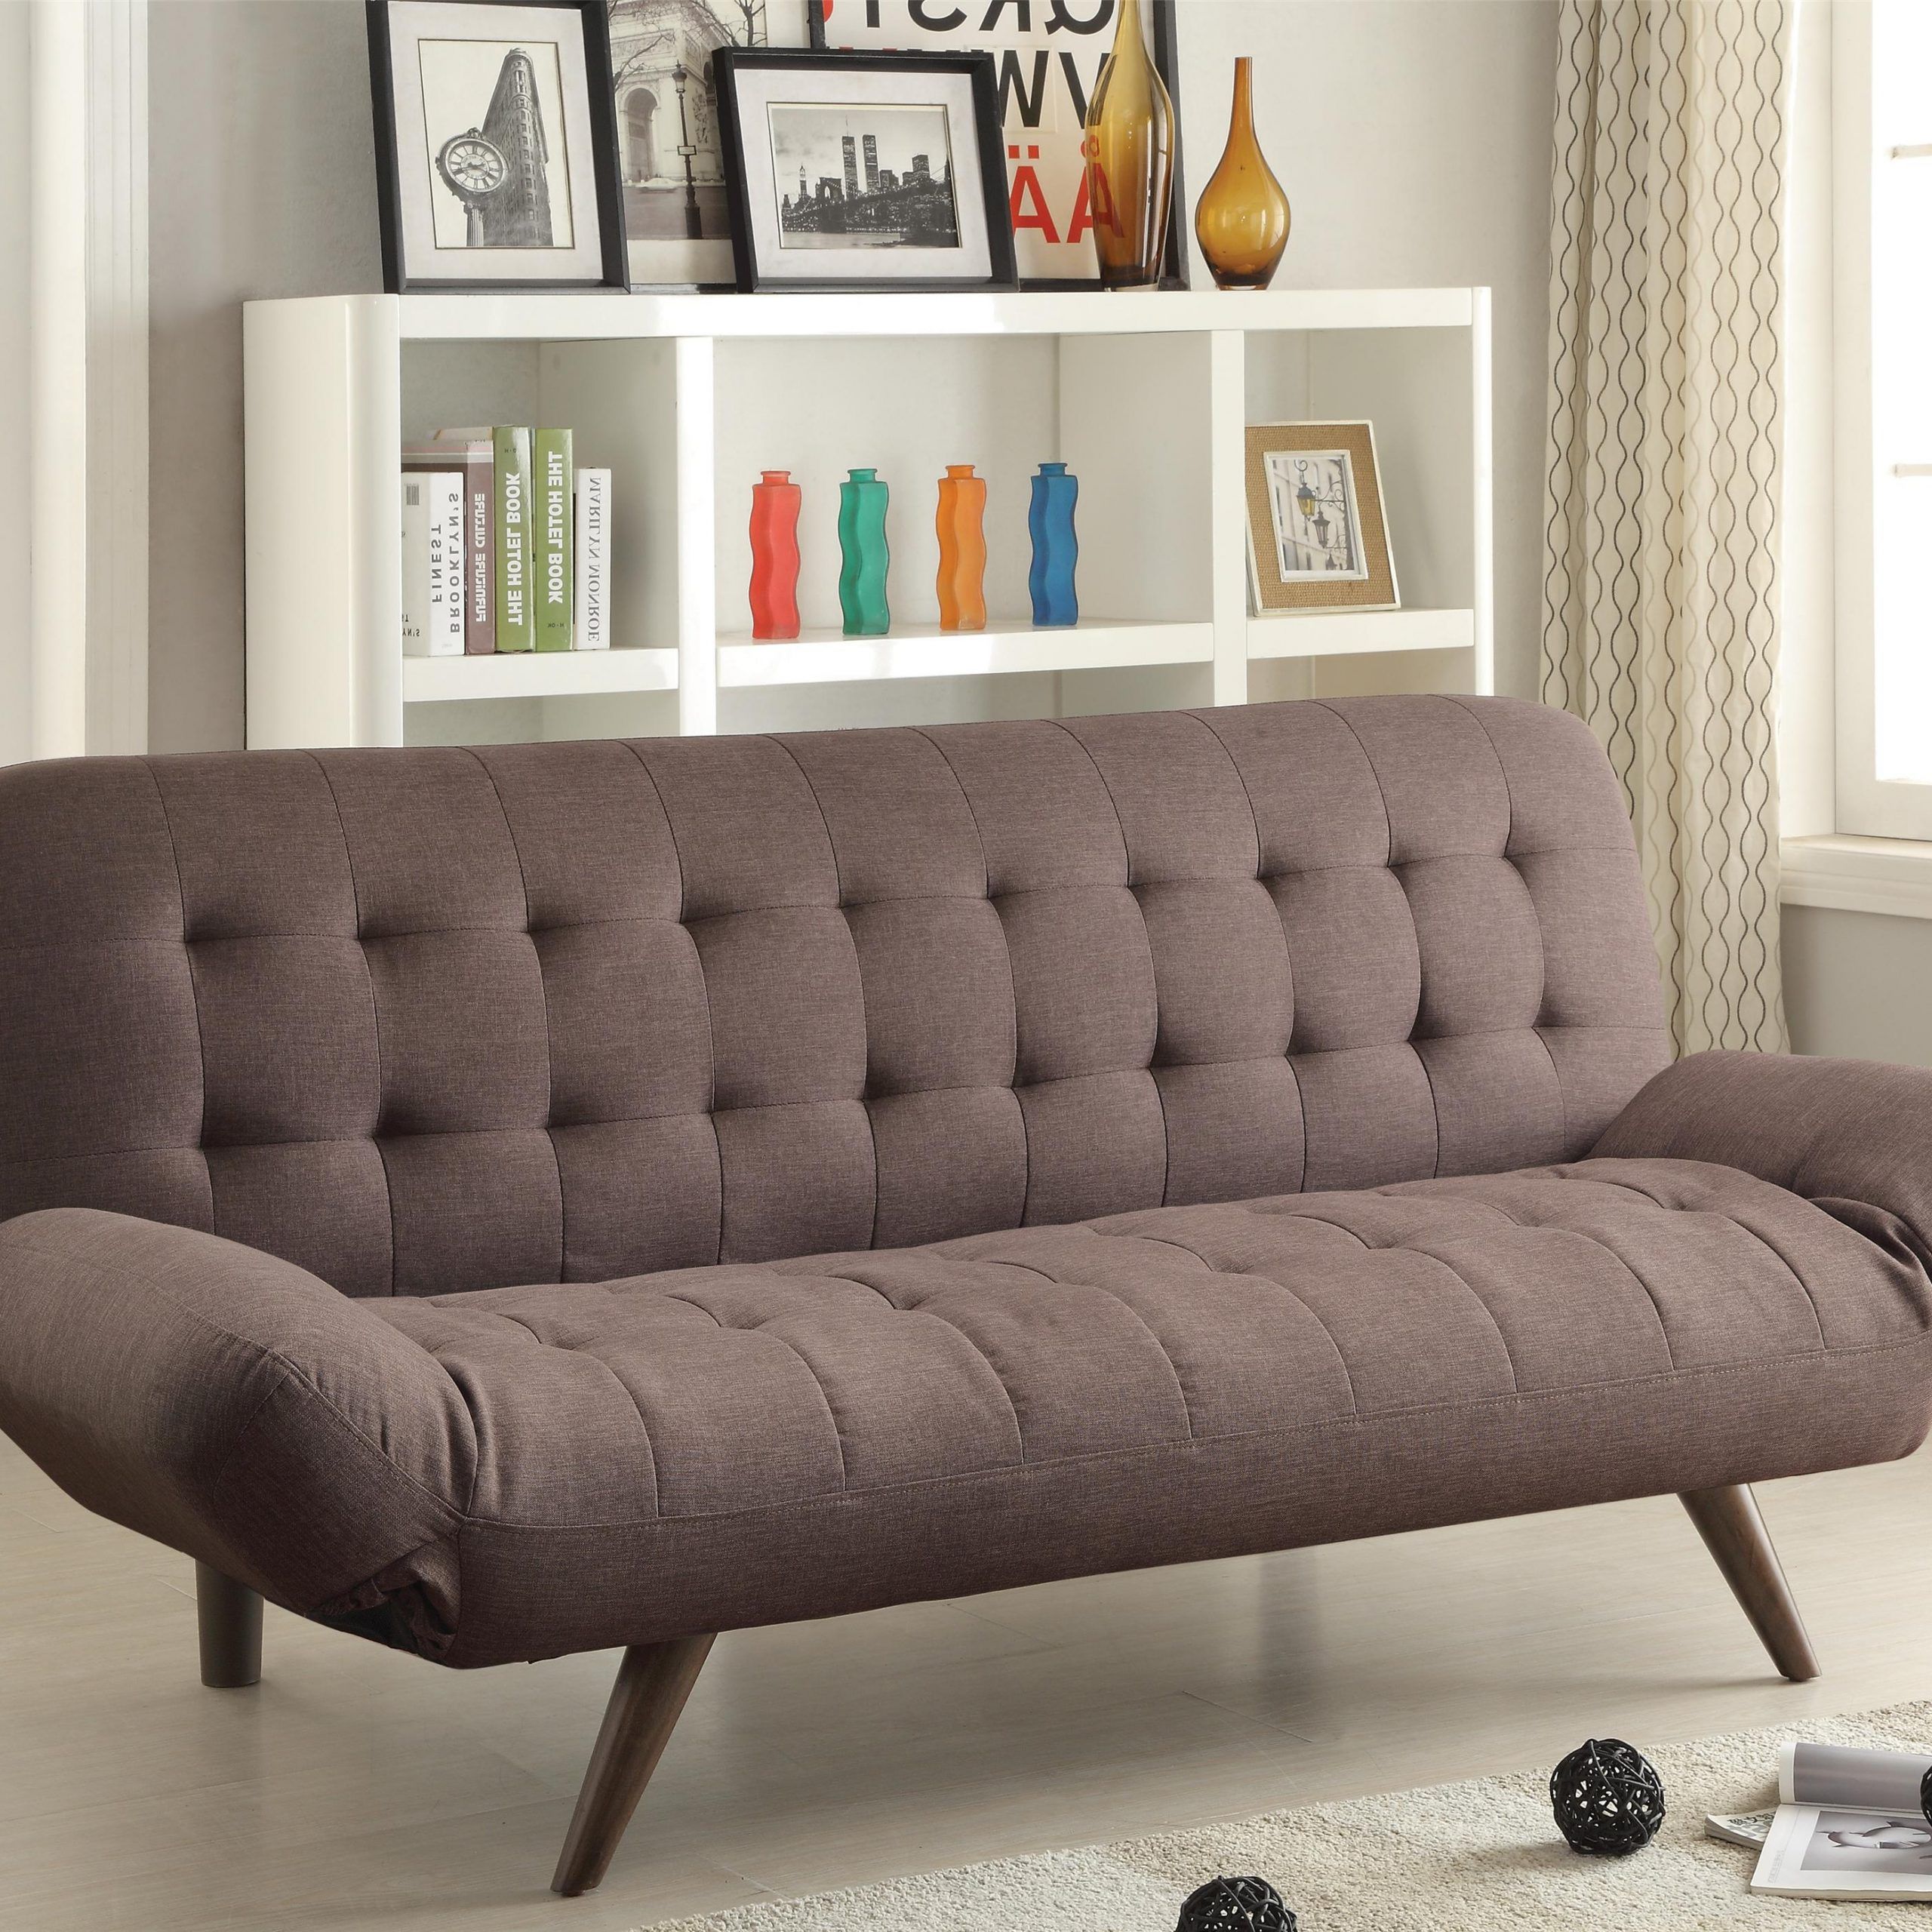 Easton Small Space Sectional Futon Sofas With Popular Sofa Beds And Futons Retro Modern Sofa Bed With Tufting (View 8 of 25)